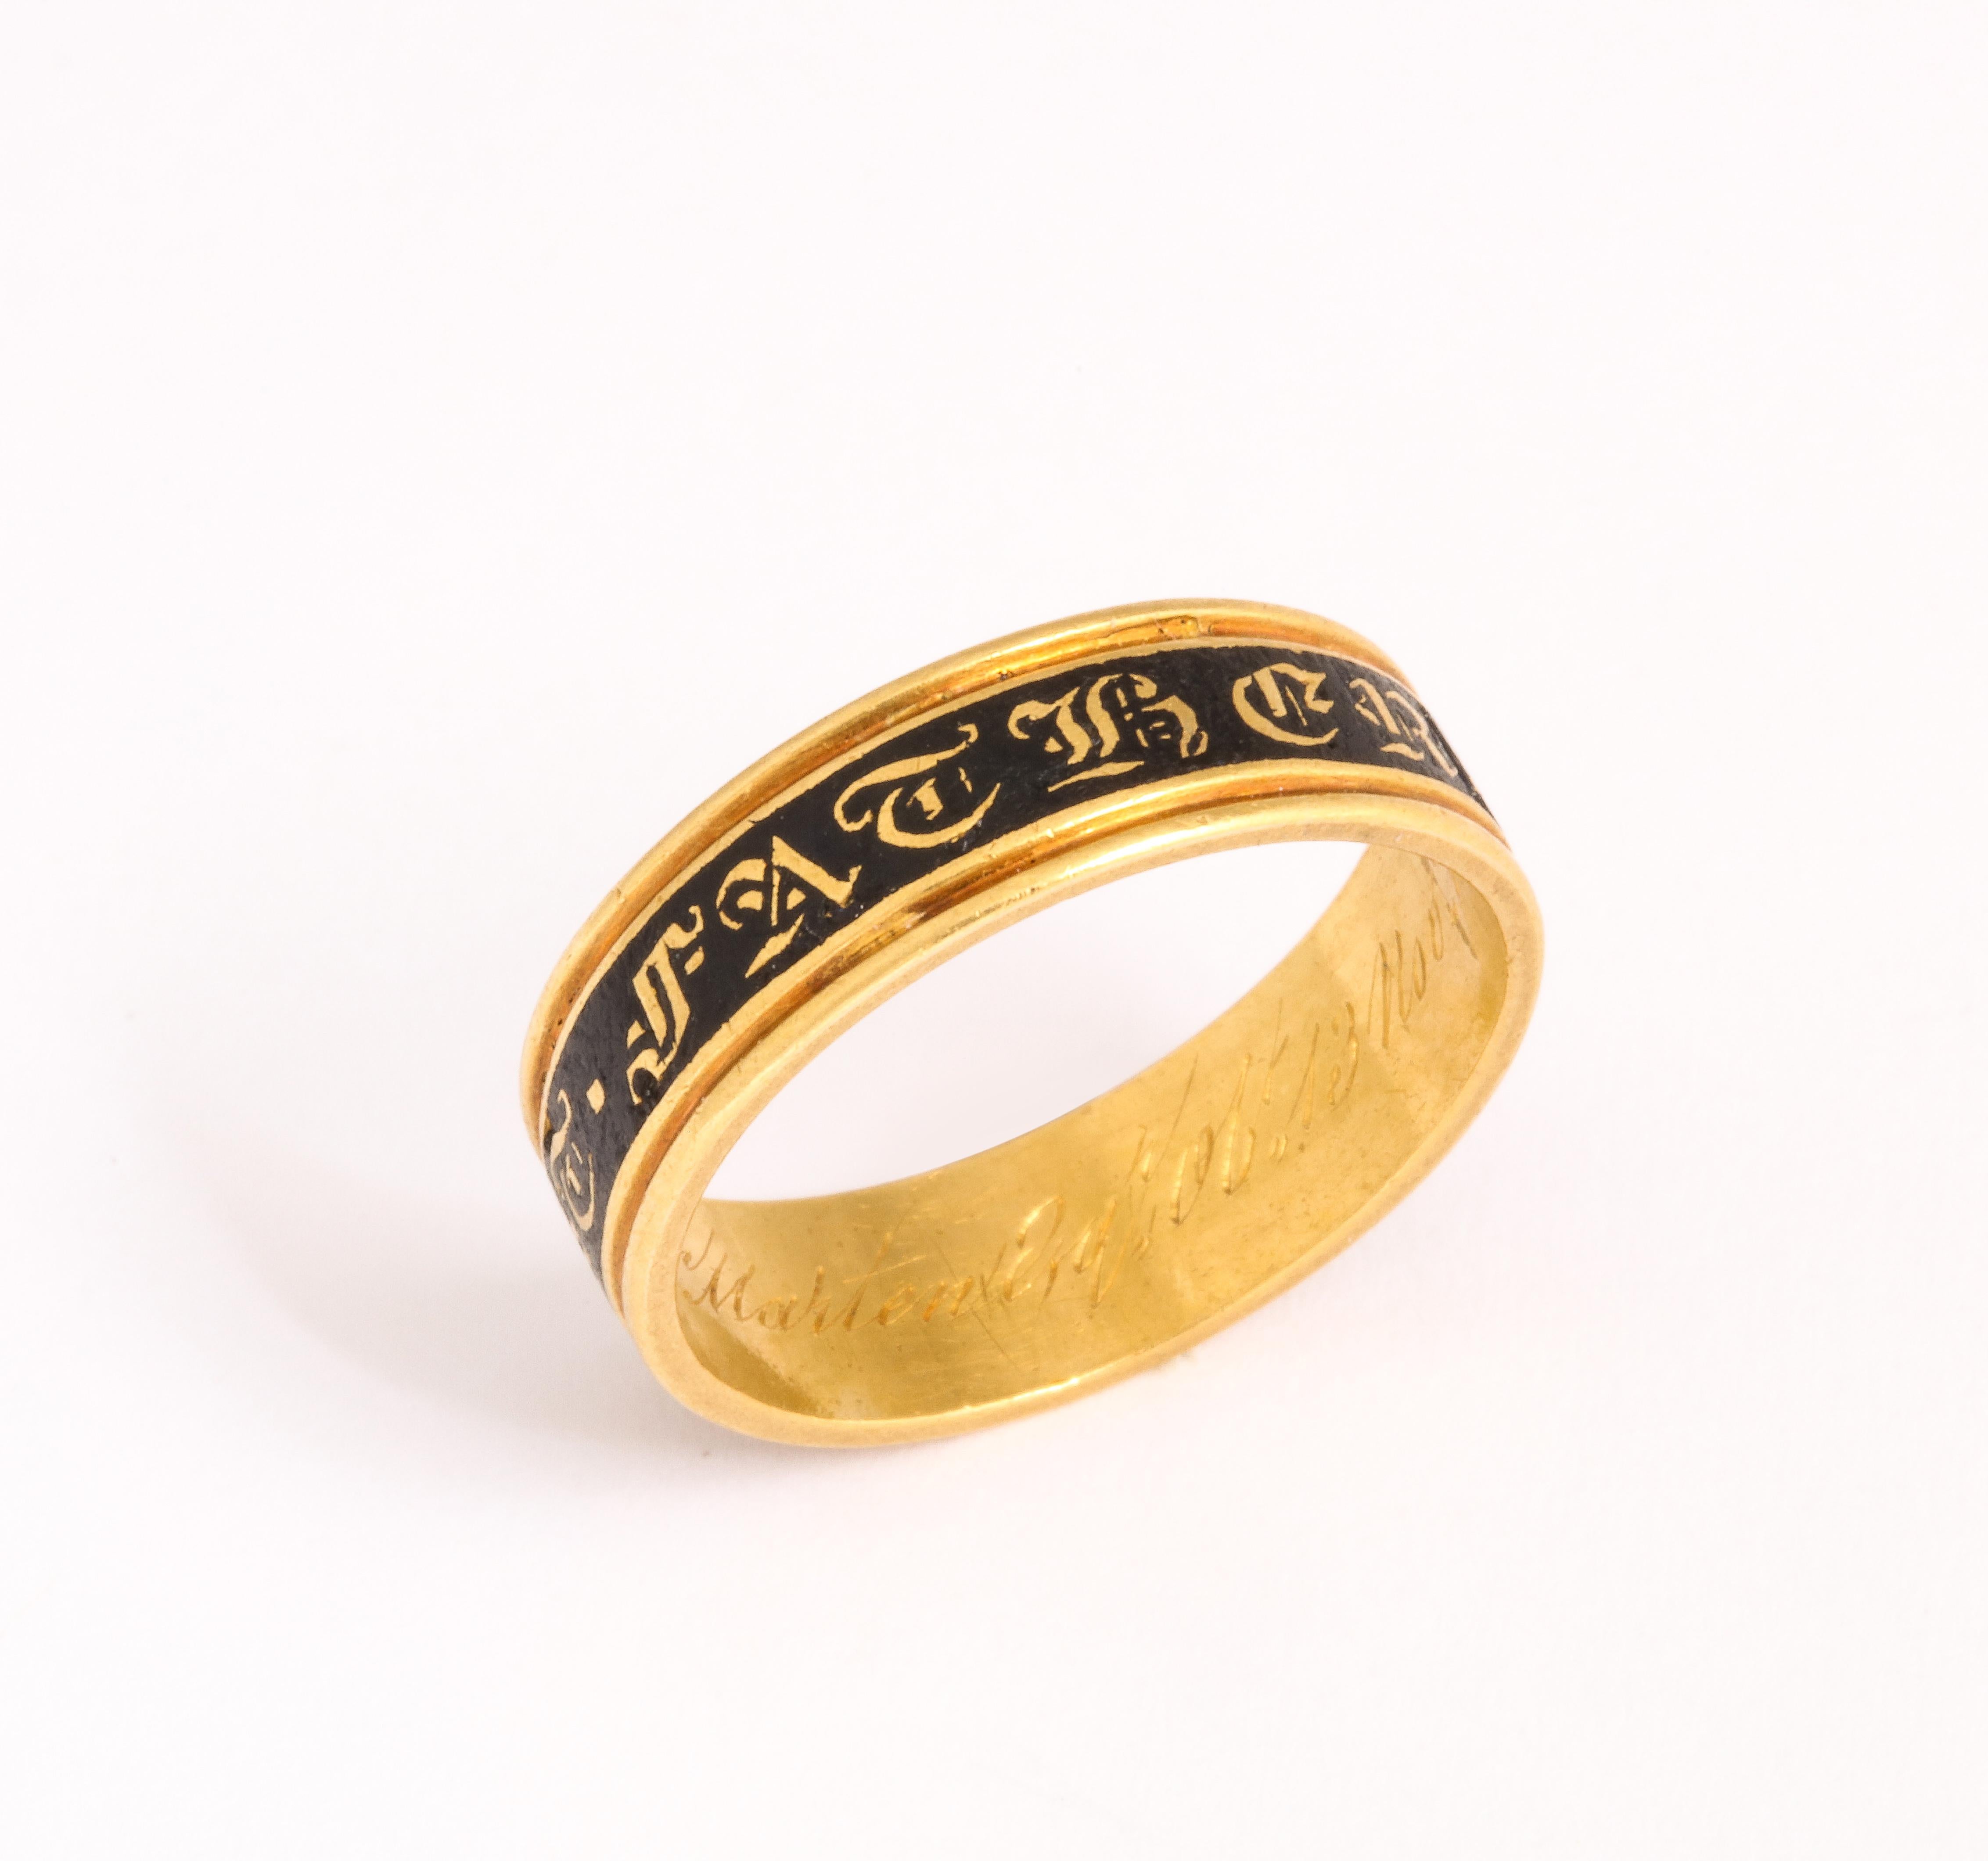 Personalized Men's DAD Ring Gold Plated Silver Engravable | Dad rings, Gold  chains for men, Gold rings